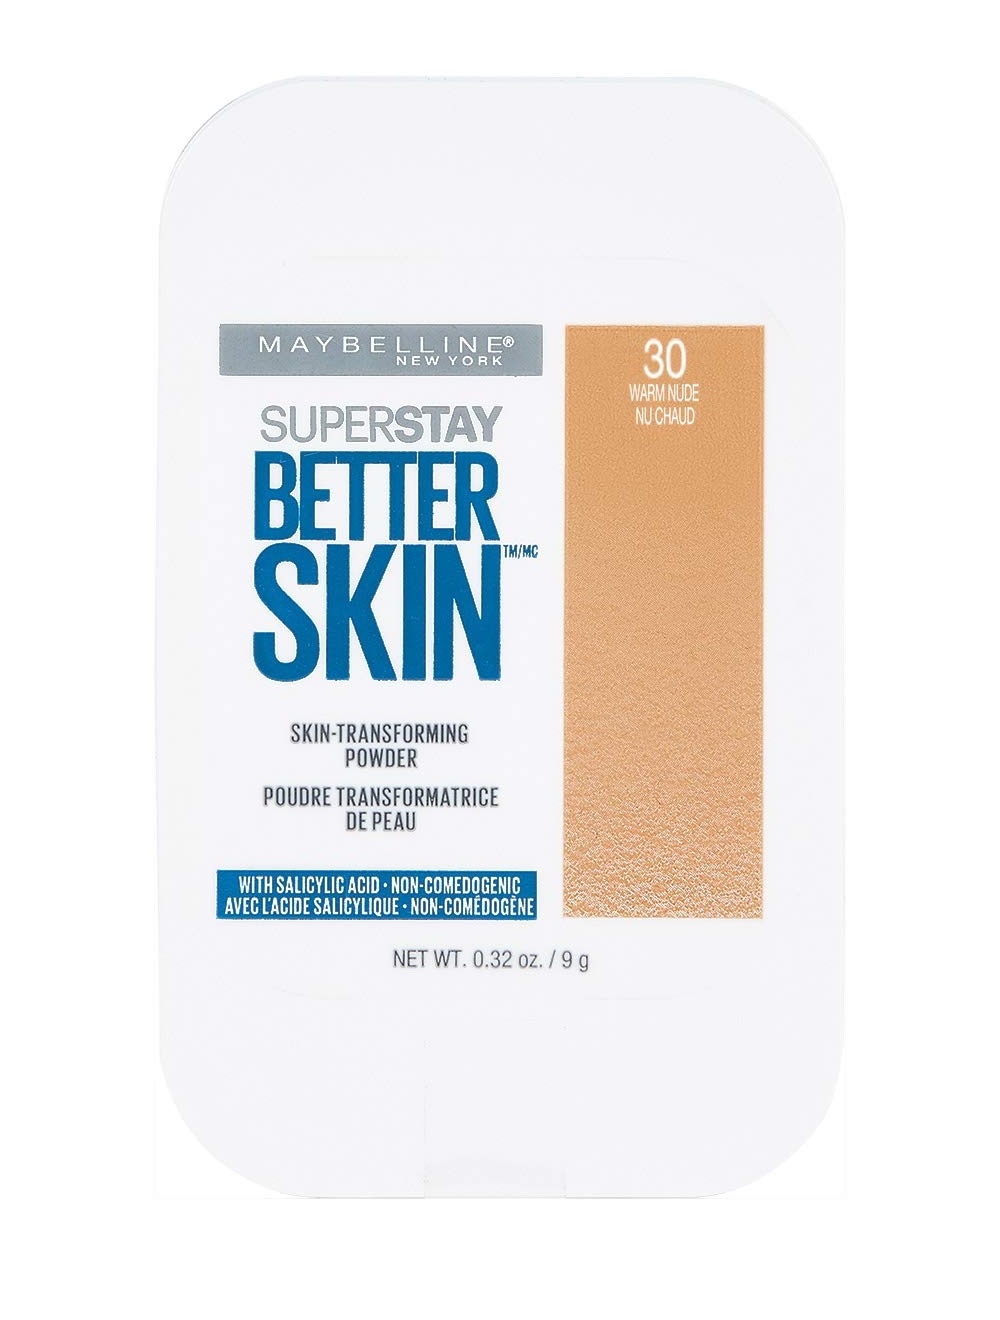 Maybelline Super Stay Better Skin Powder, Warm Nude - image 1 of 4